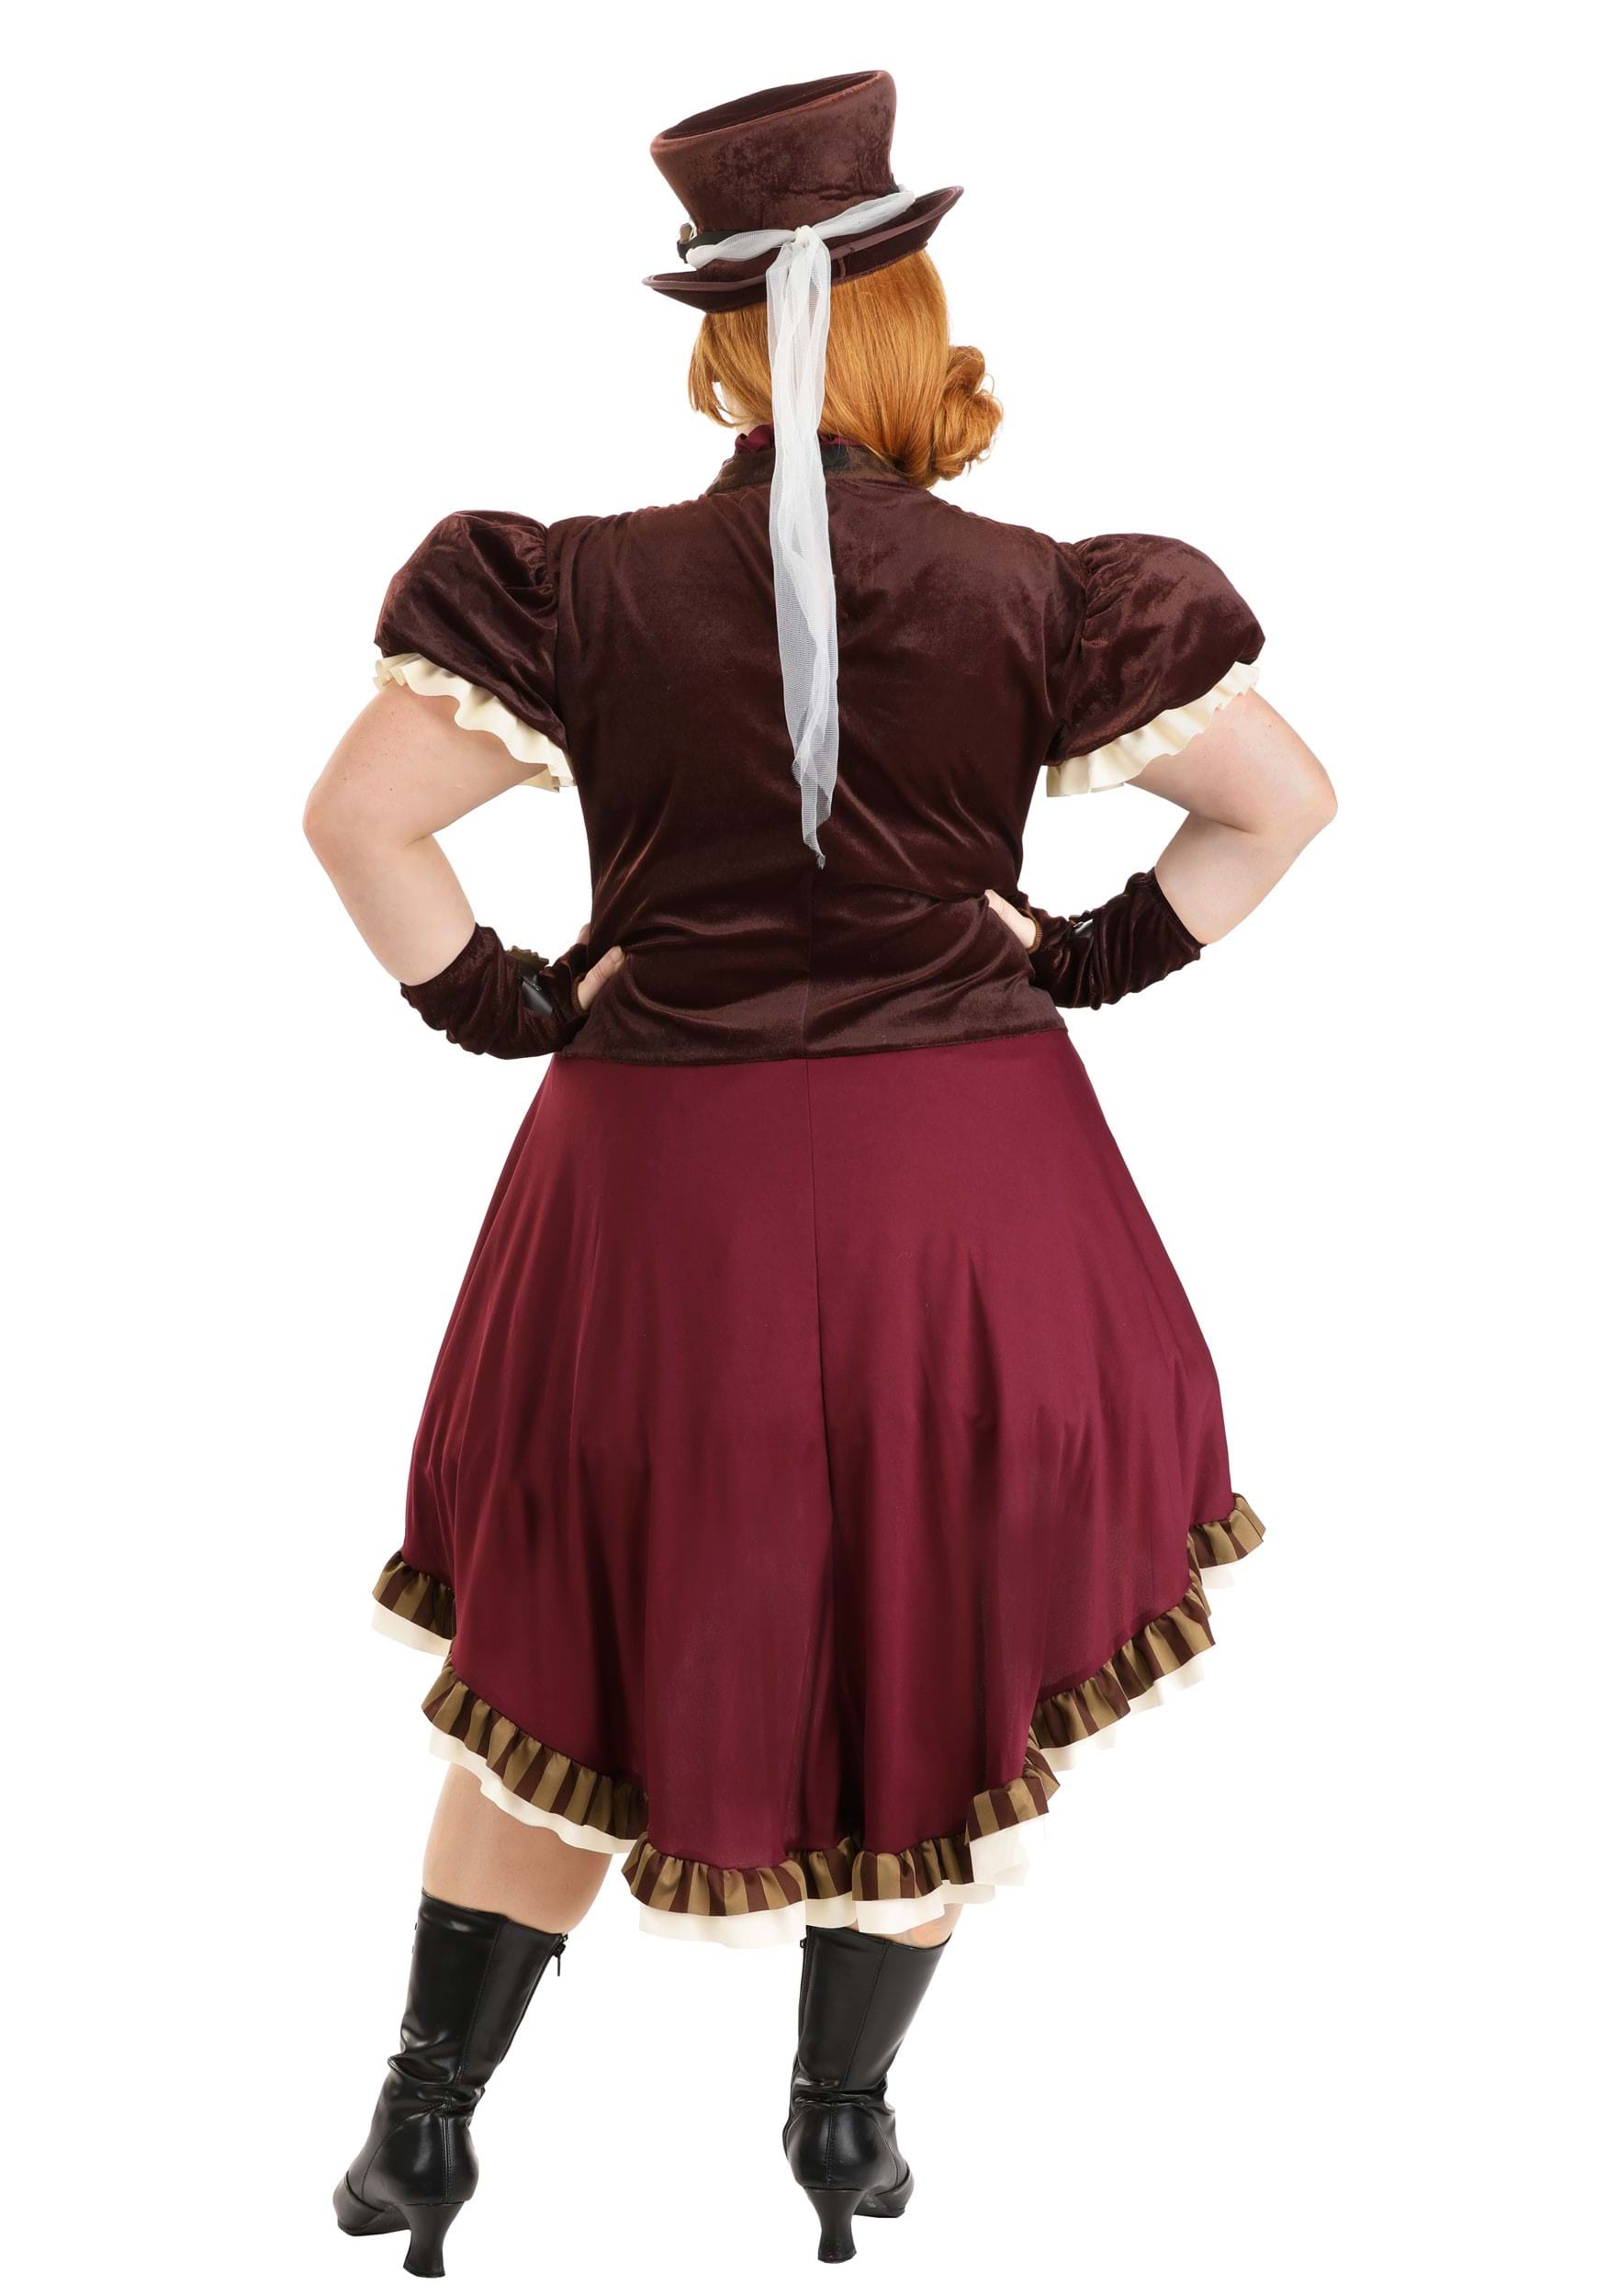 Steampunk Lady Plus Size Costume for Women